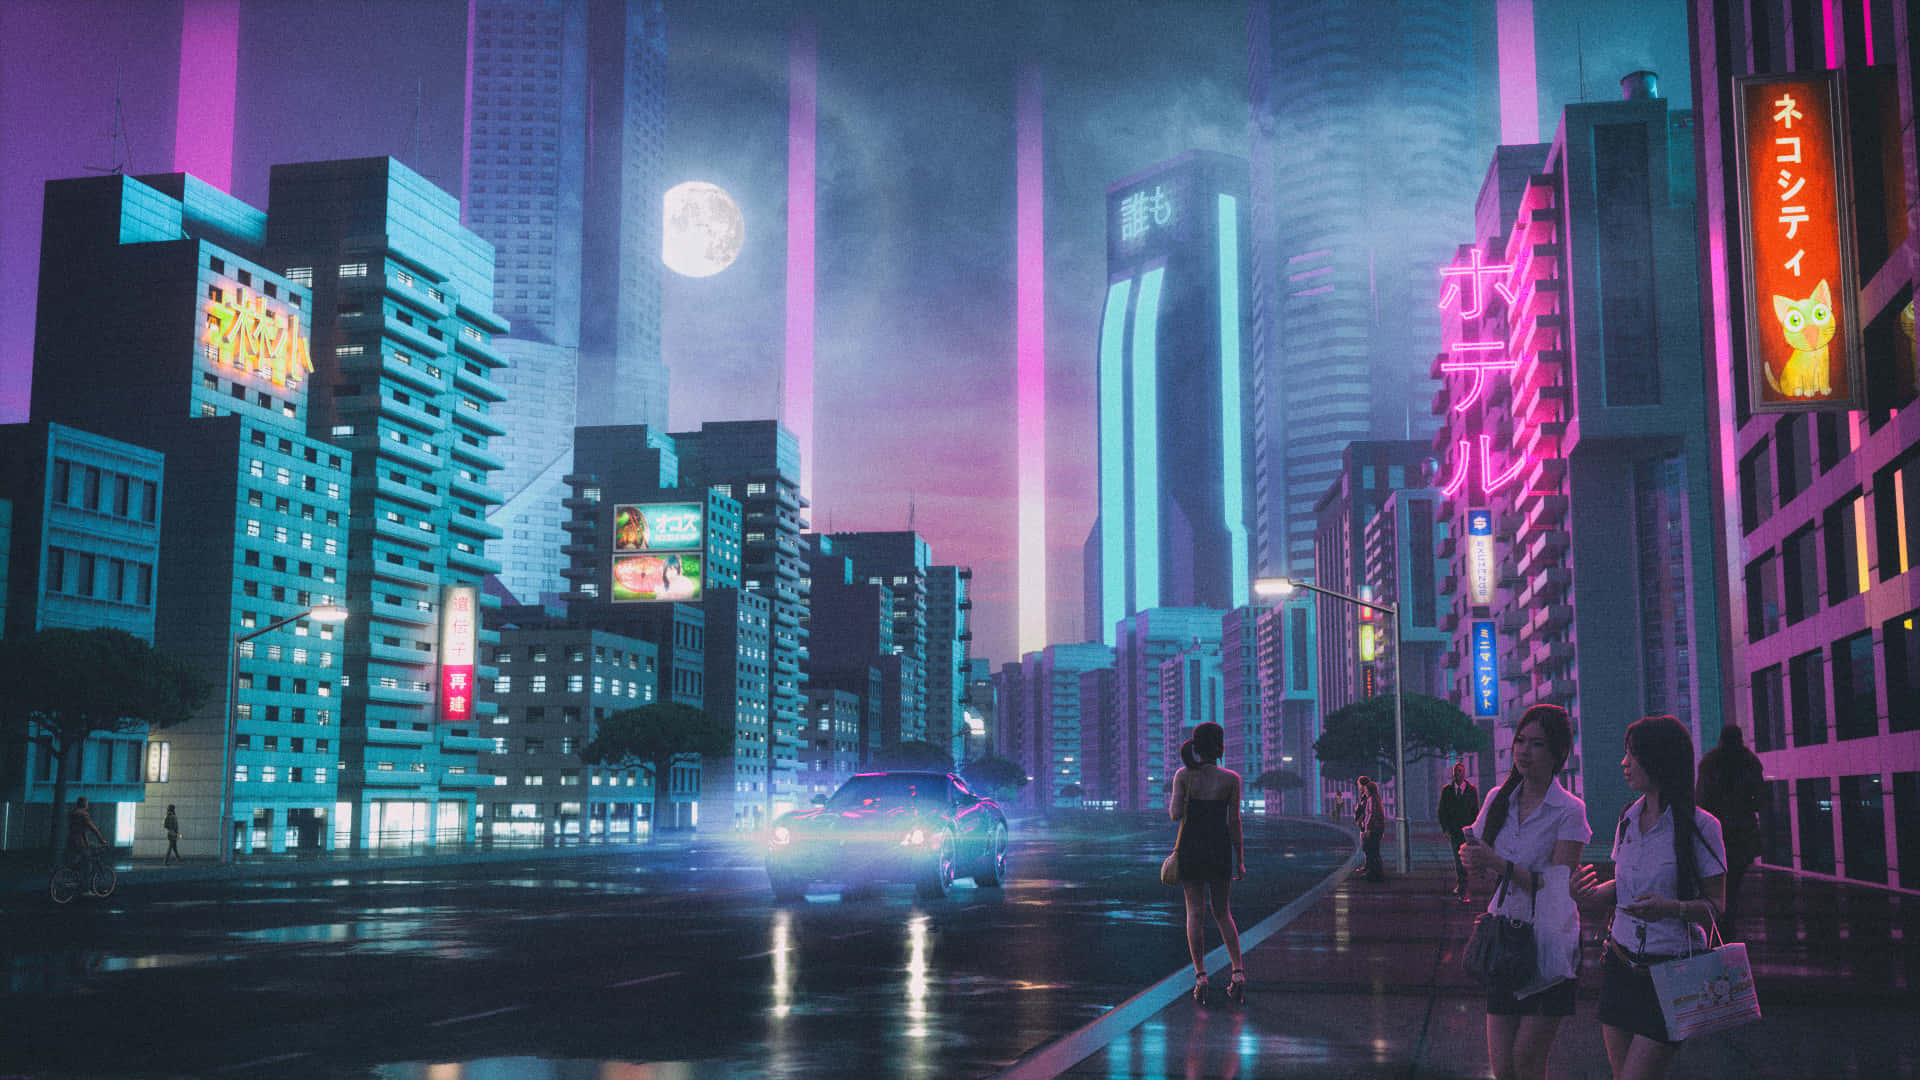 Get lost and explore the neon city of Synthwave Wallpaper